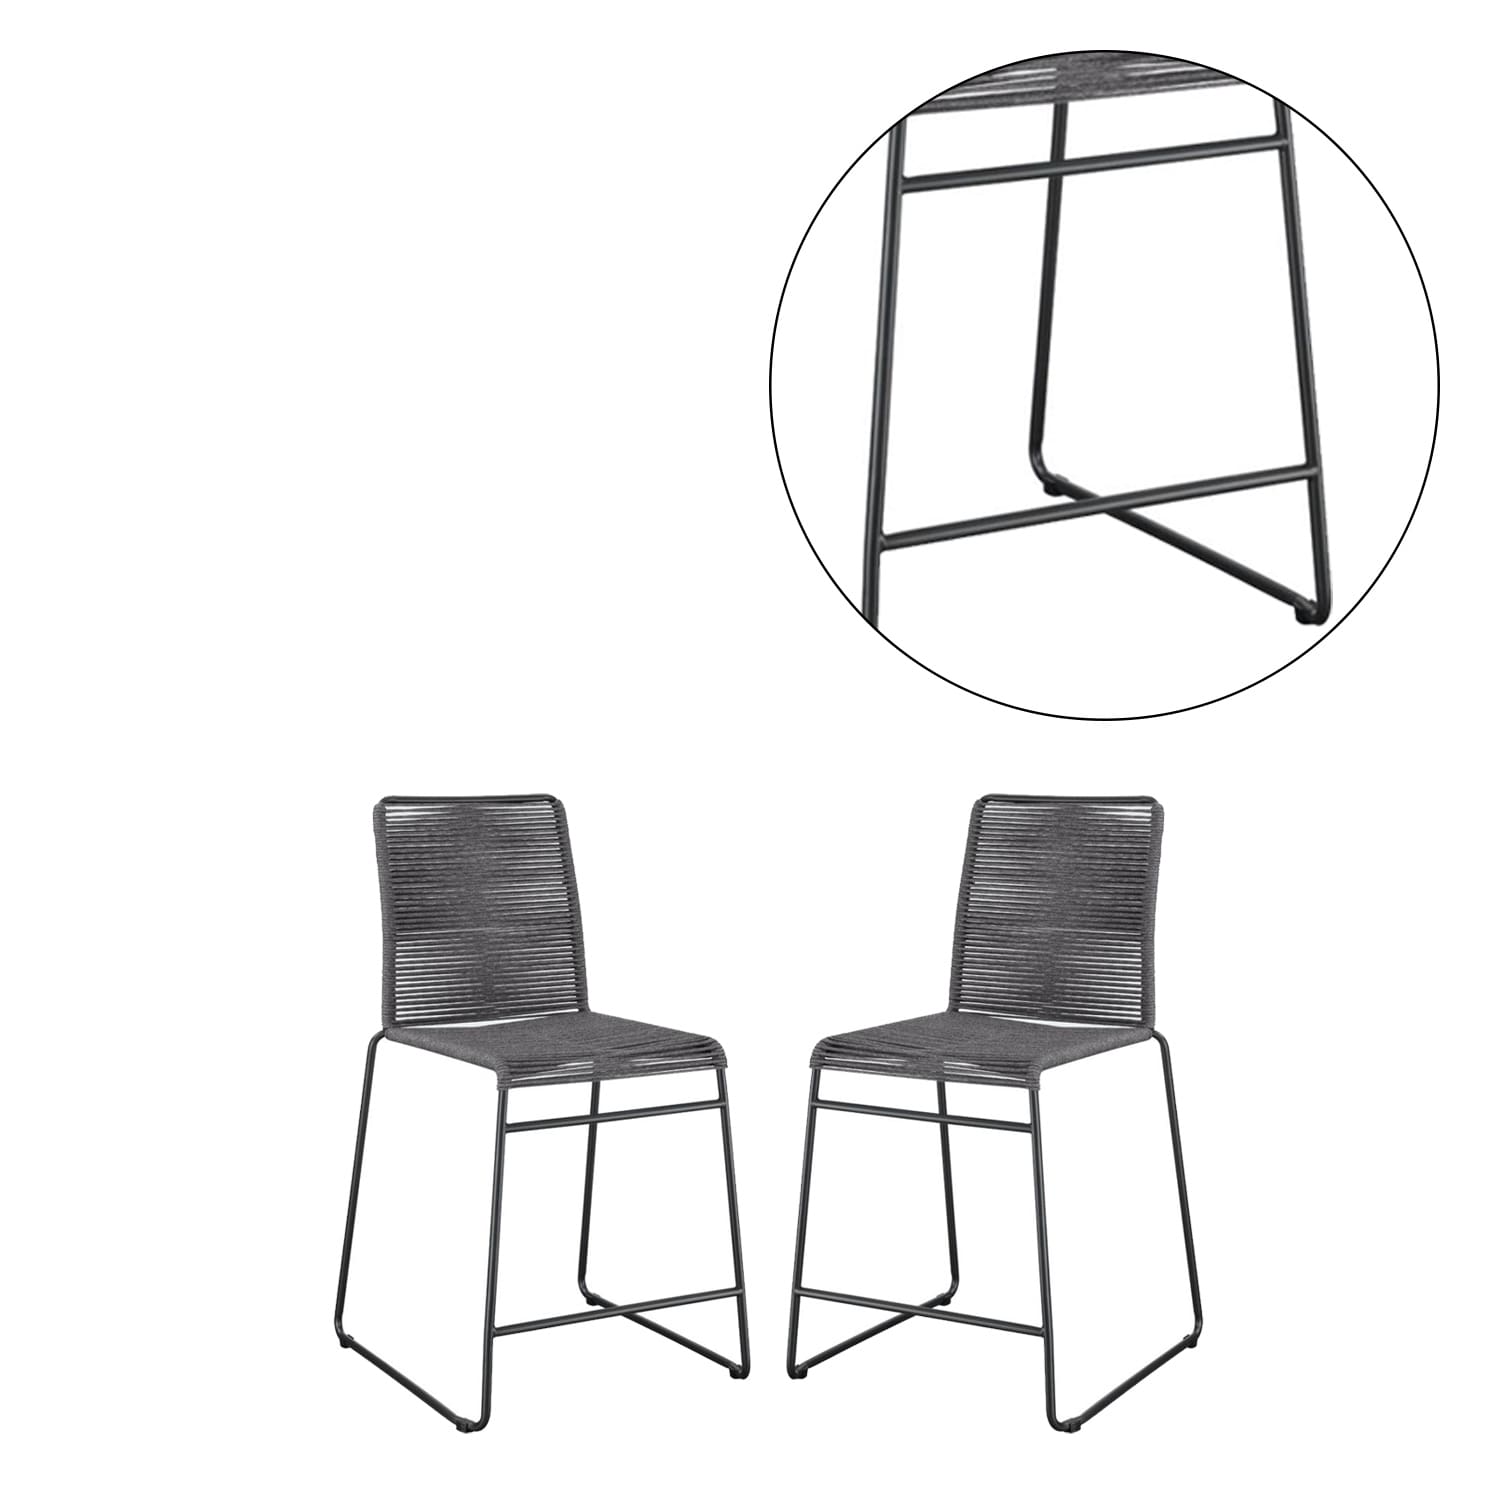 Set of 2 Rope Woven Dining Chair with Metal Design - Counter height